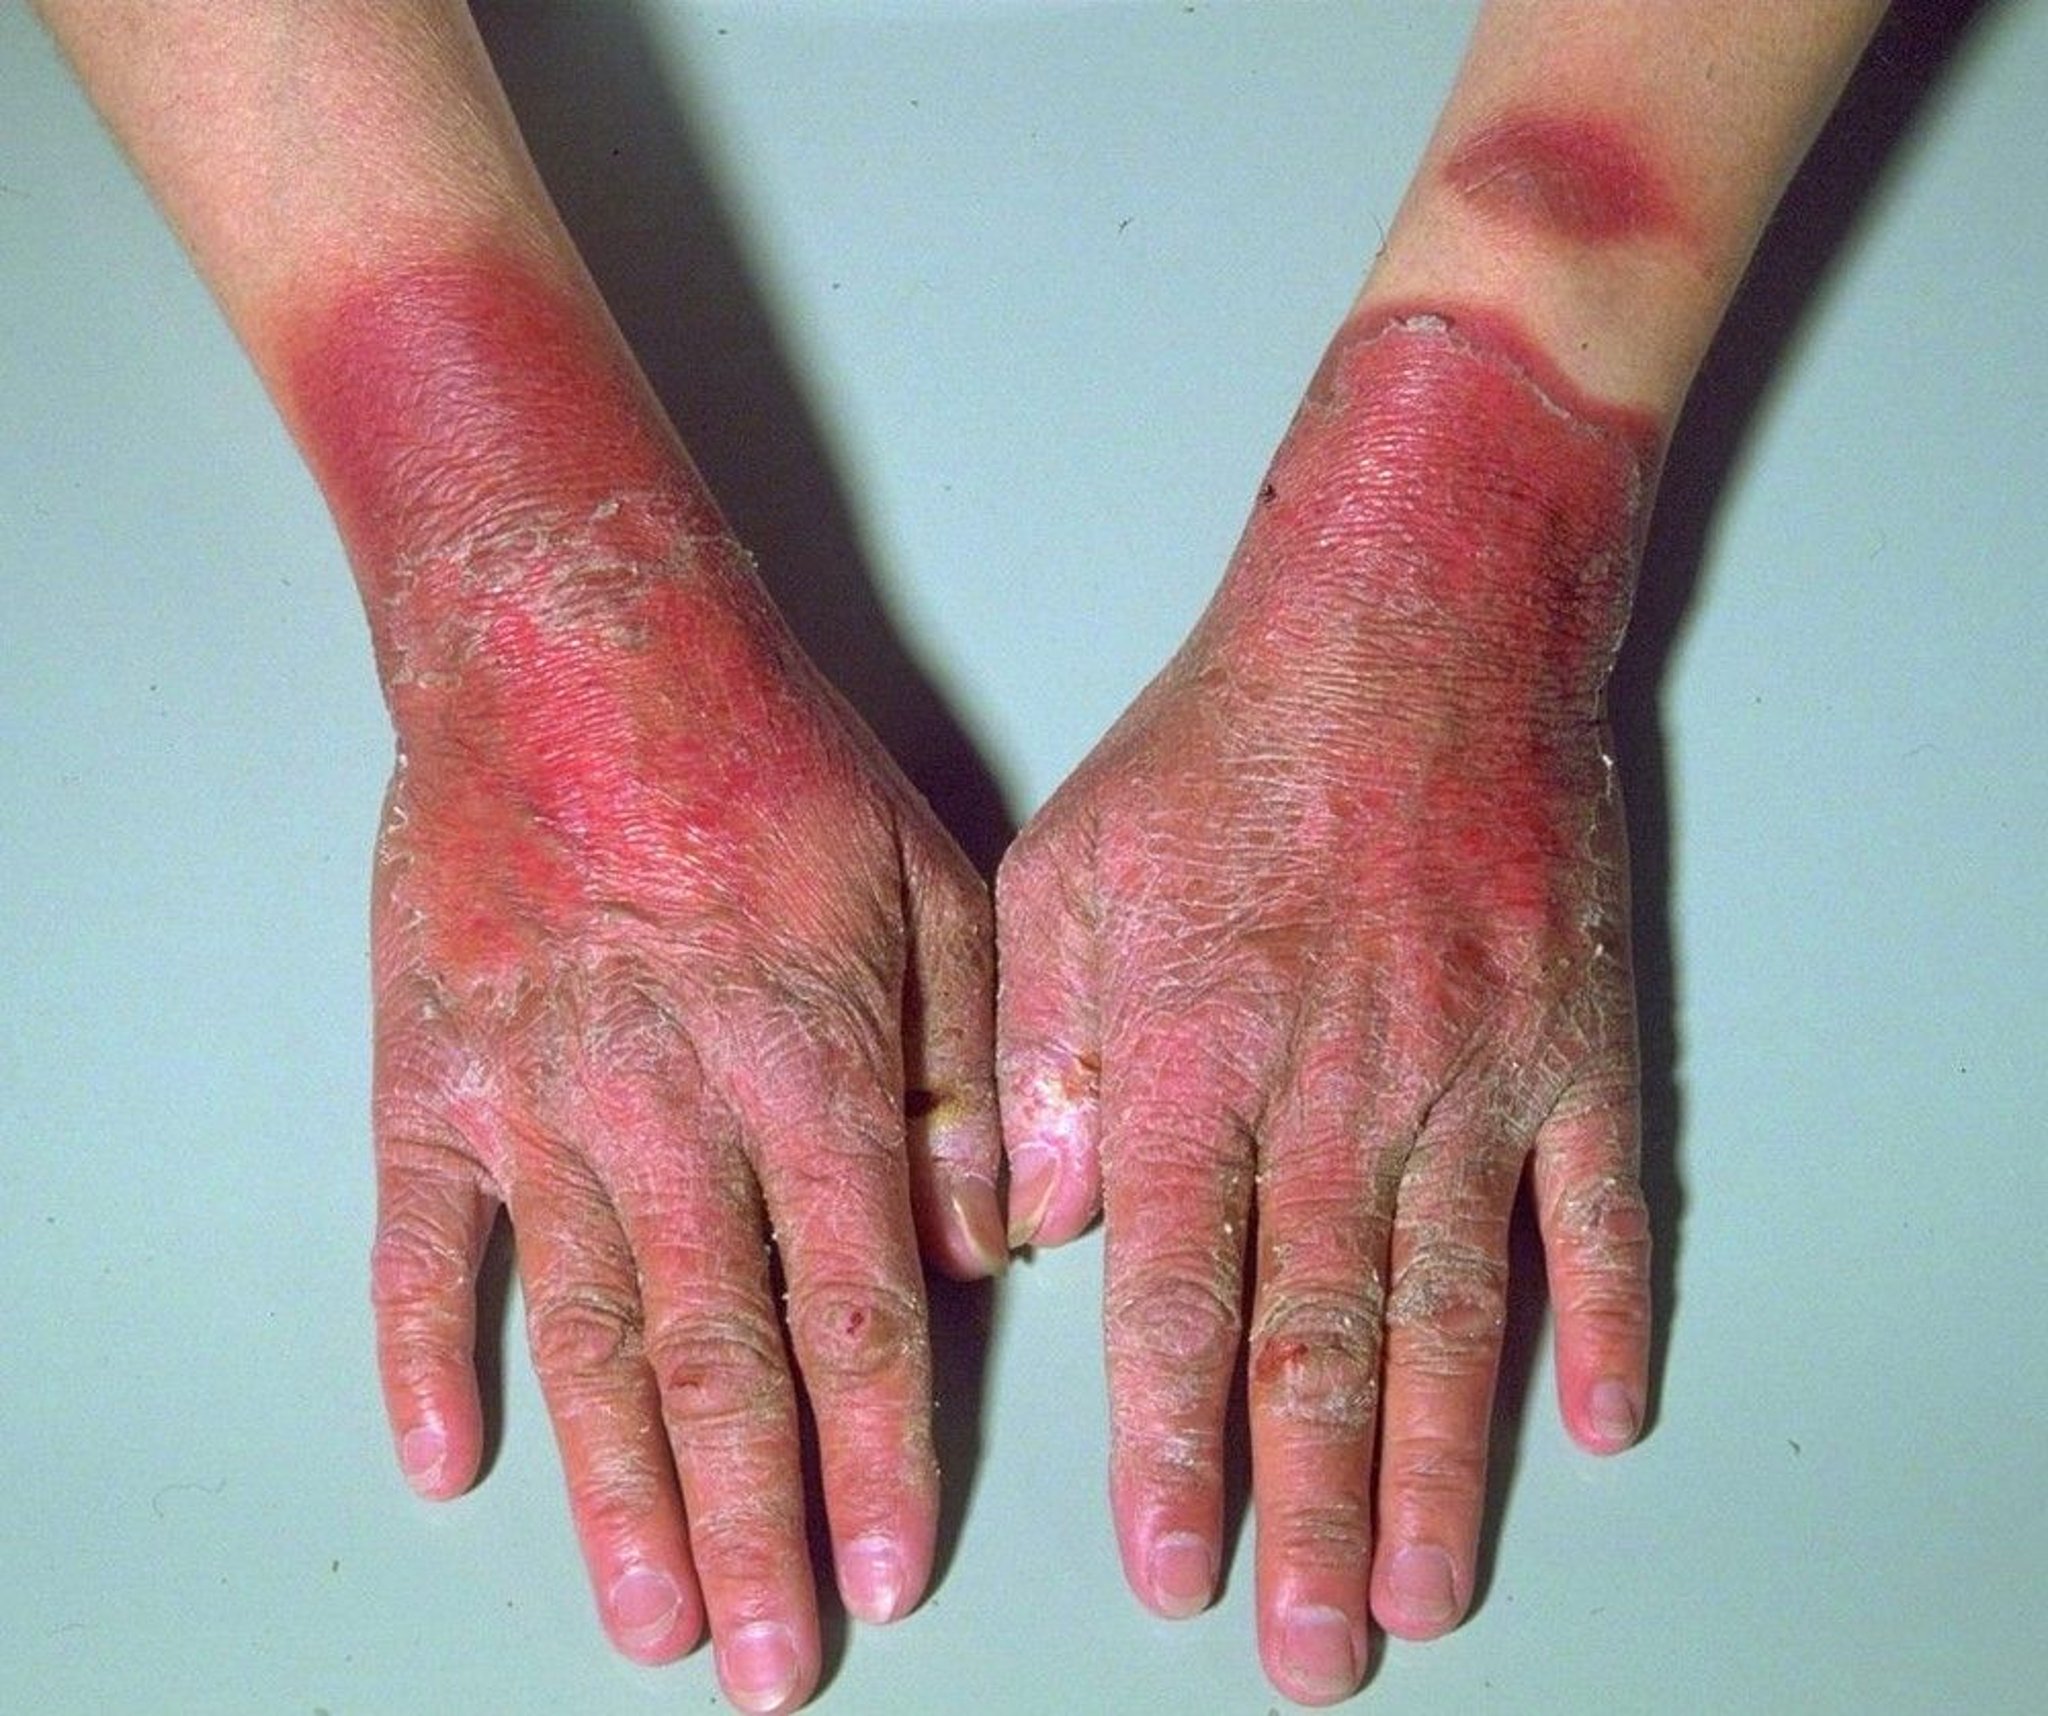 Rash on the Hands Due to Pellagra